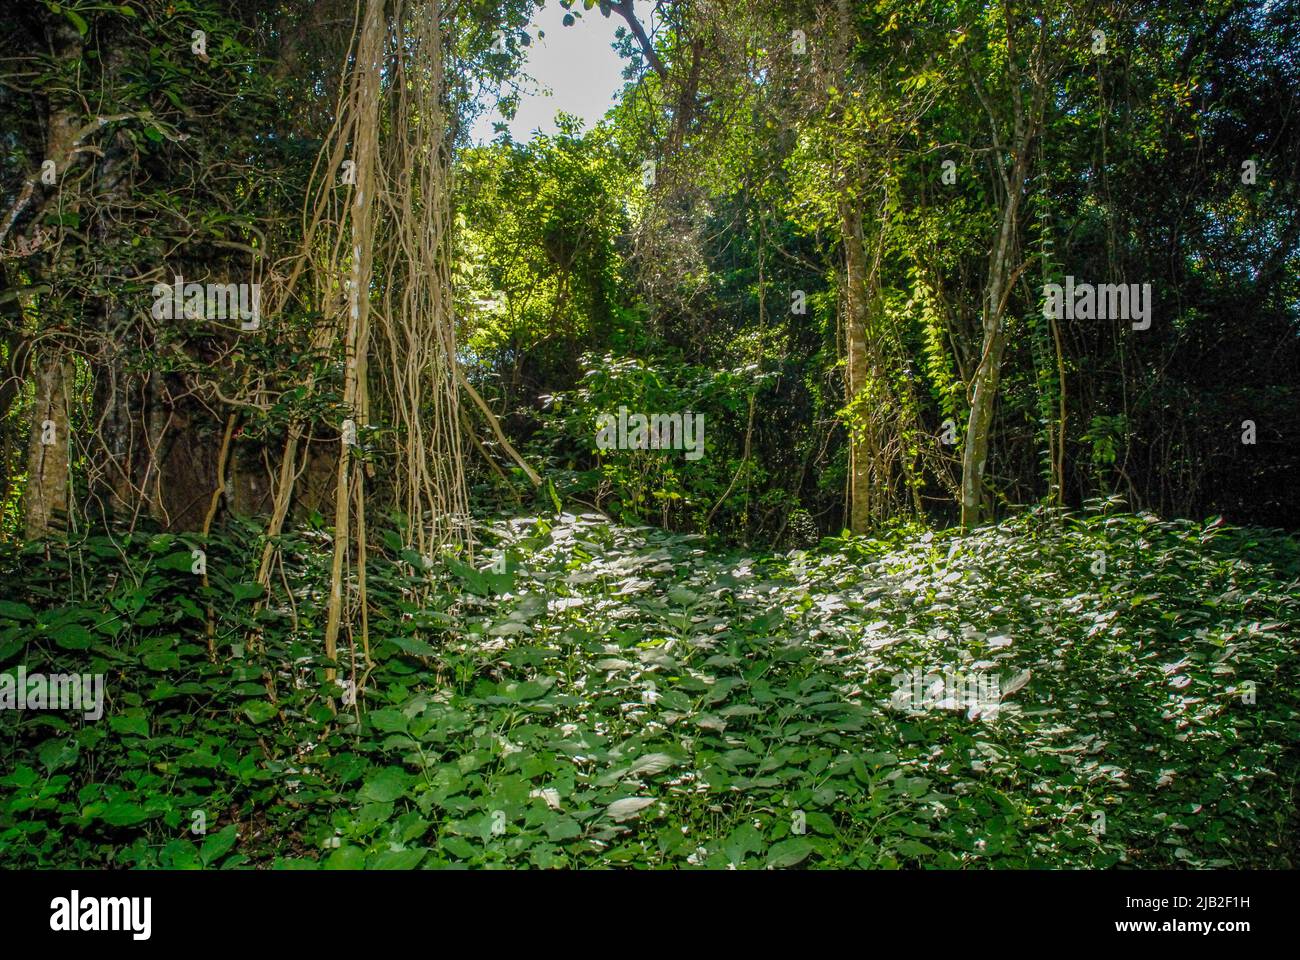 Forest in Santa Lucia delta, South Africa Stock Photo